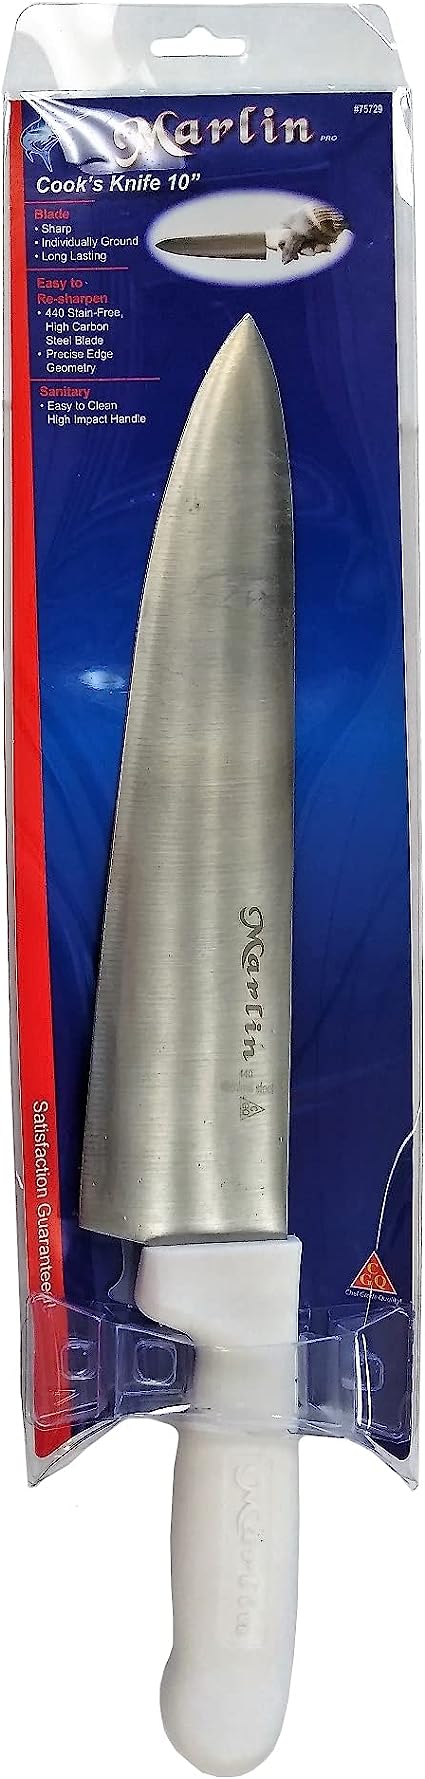 Marlin Pro Cook's Knife - 10"